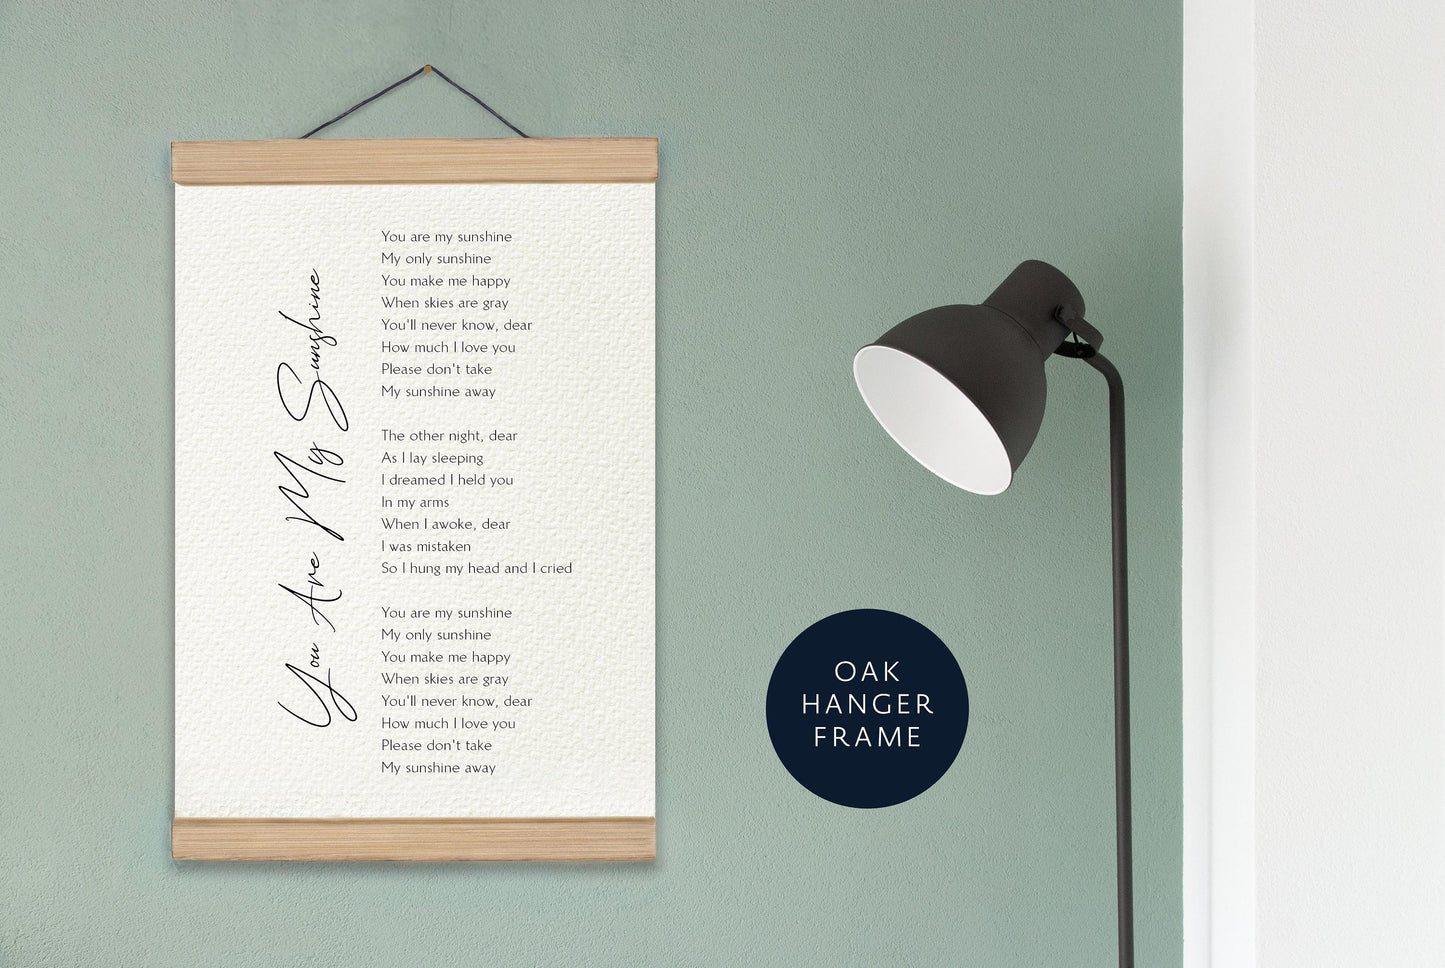 You Are My Sunshine, My Only Sunshine Poster - Song Lyrics - You are my sunshine print Framed